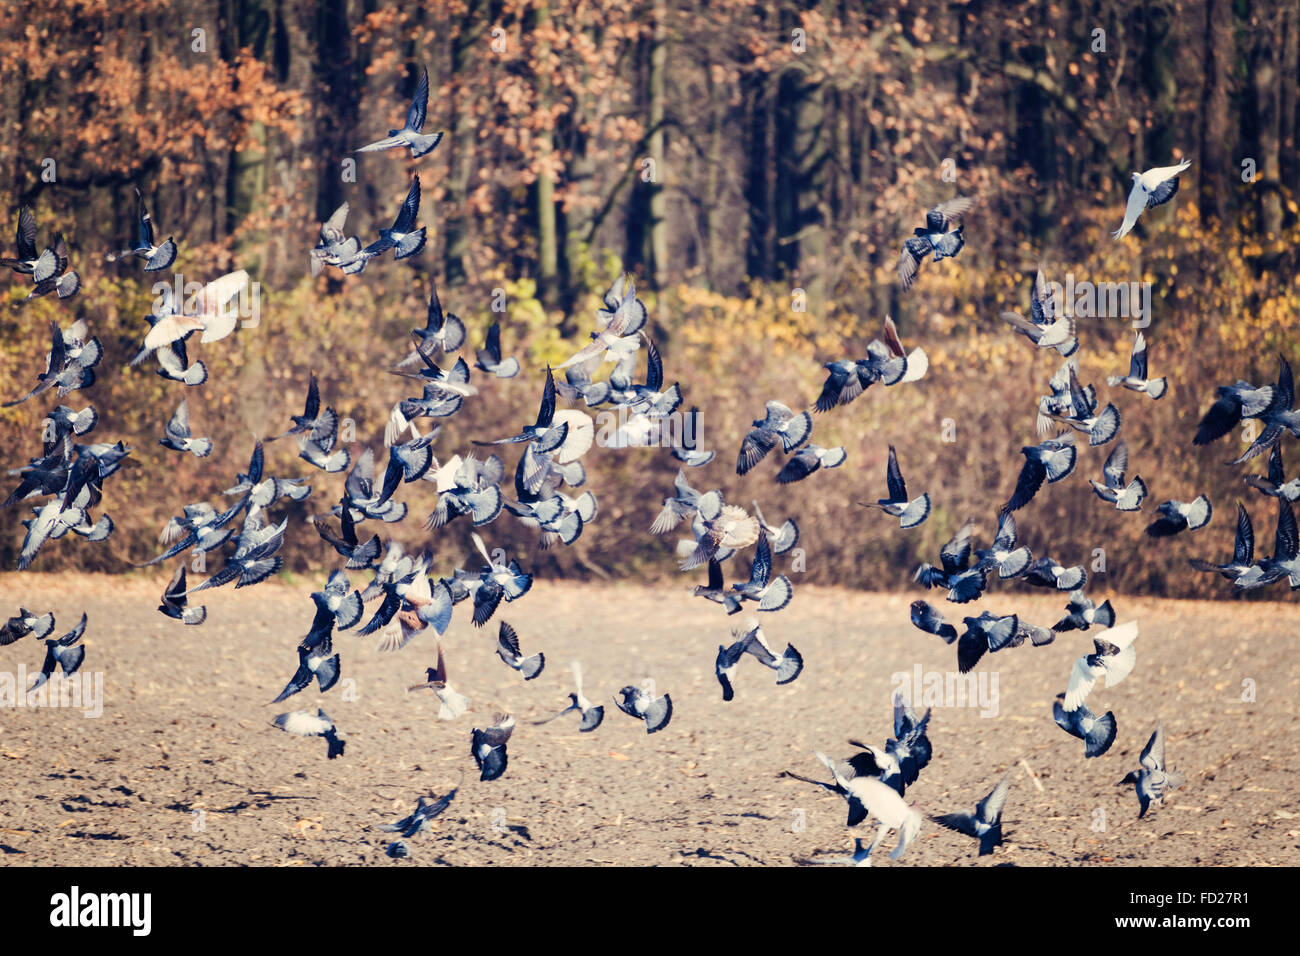 Sky with Birds in Autumn. Field of Grass, Forest Trees and Flying Birds. Pigeons Fly After Harvesting and Plowing Fields. Natura Stock Photo